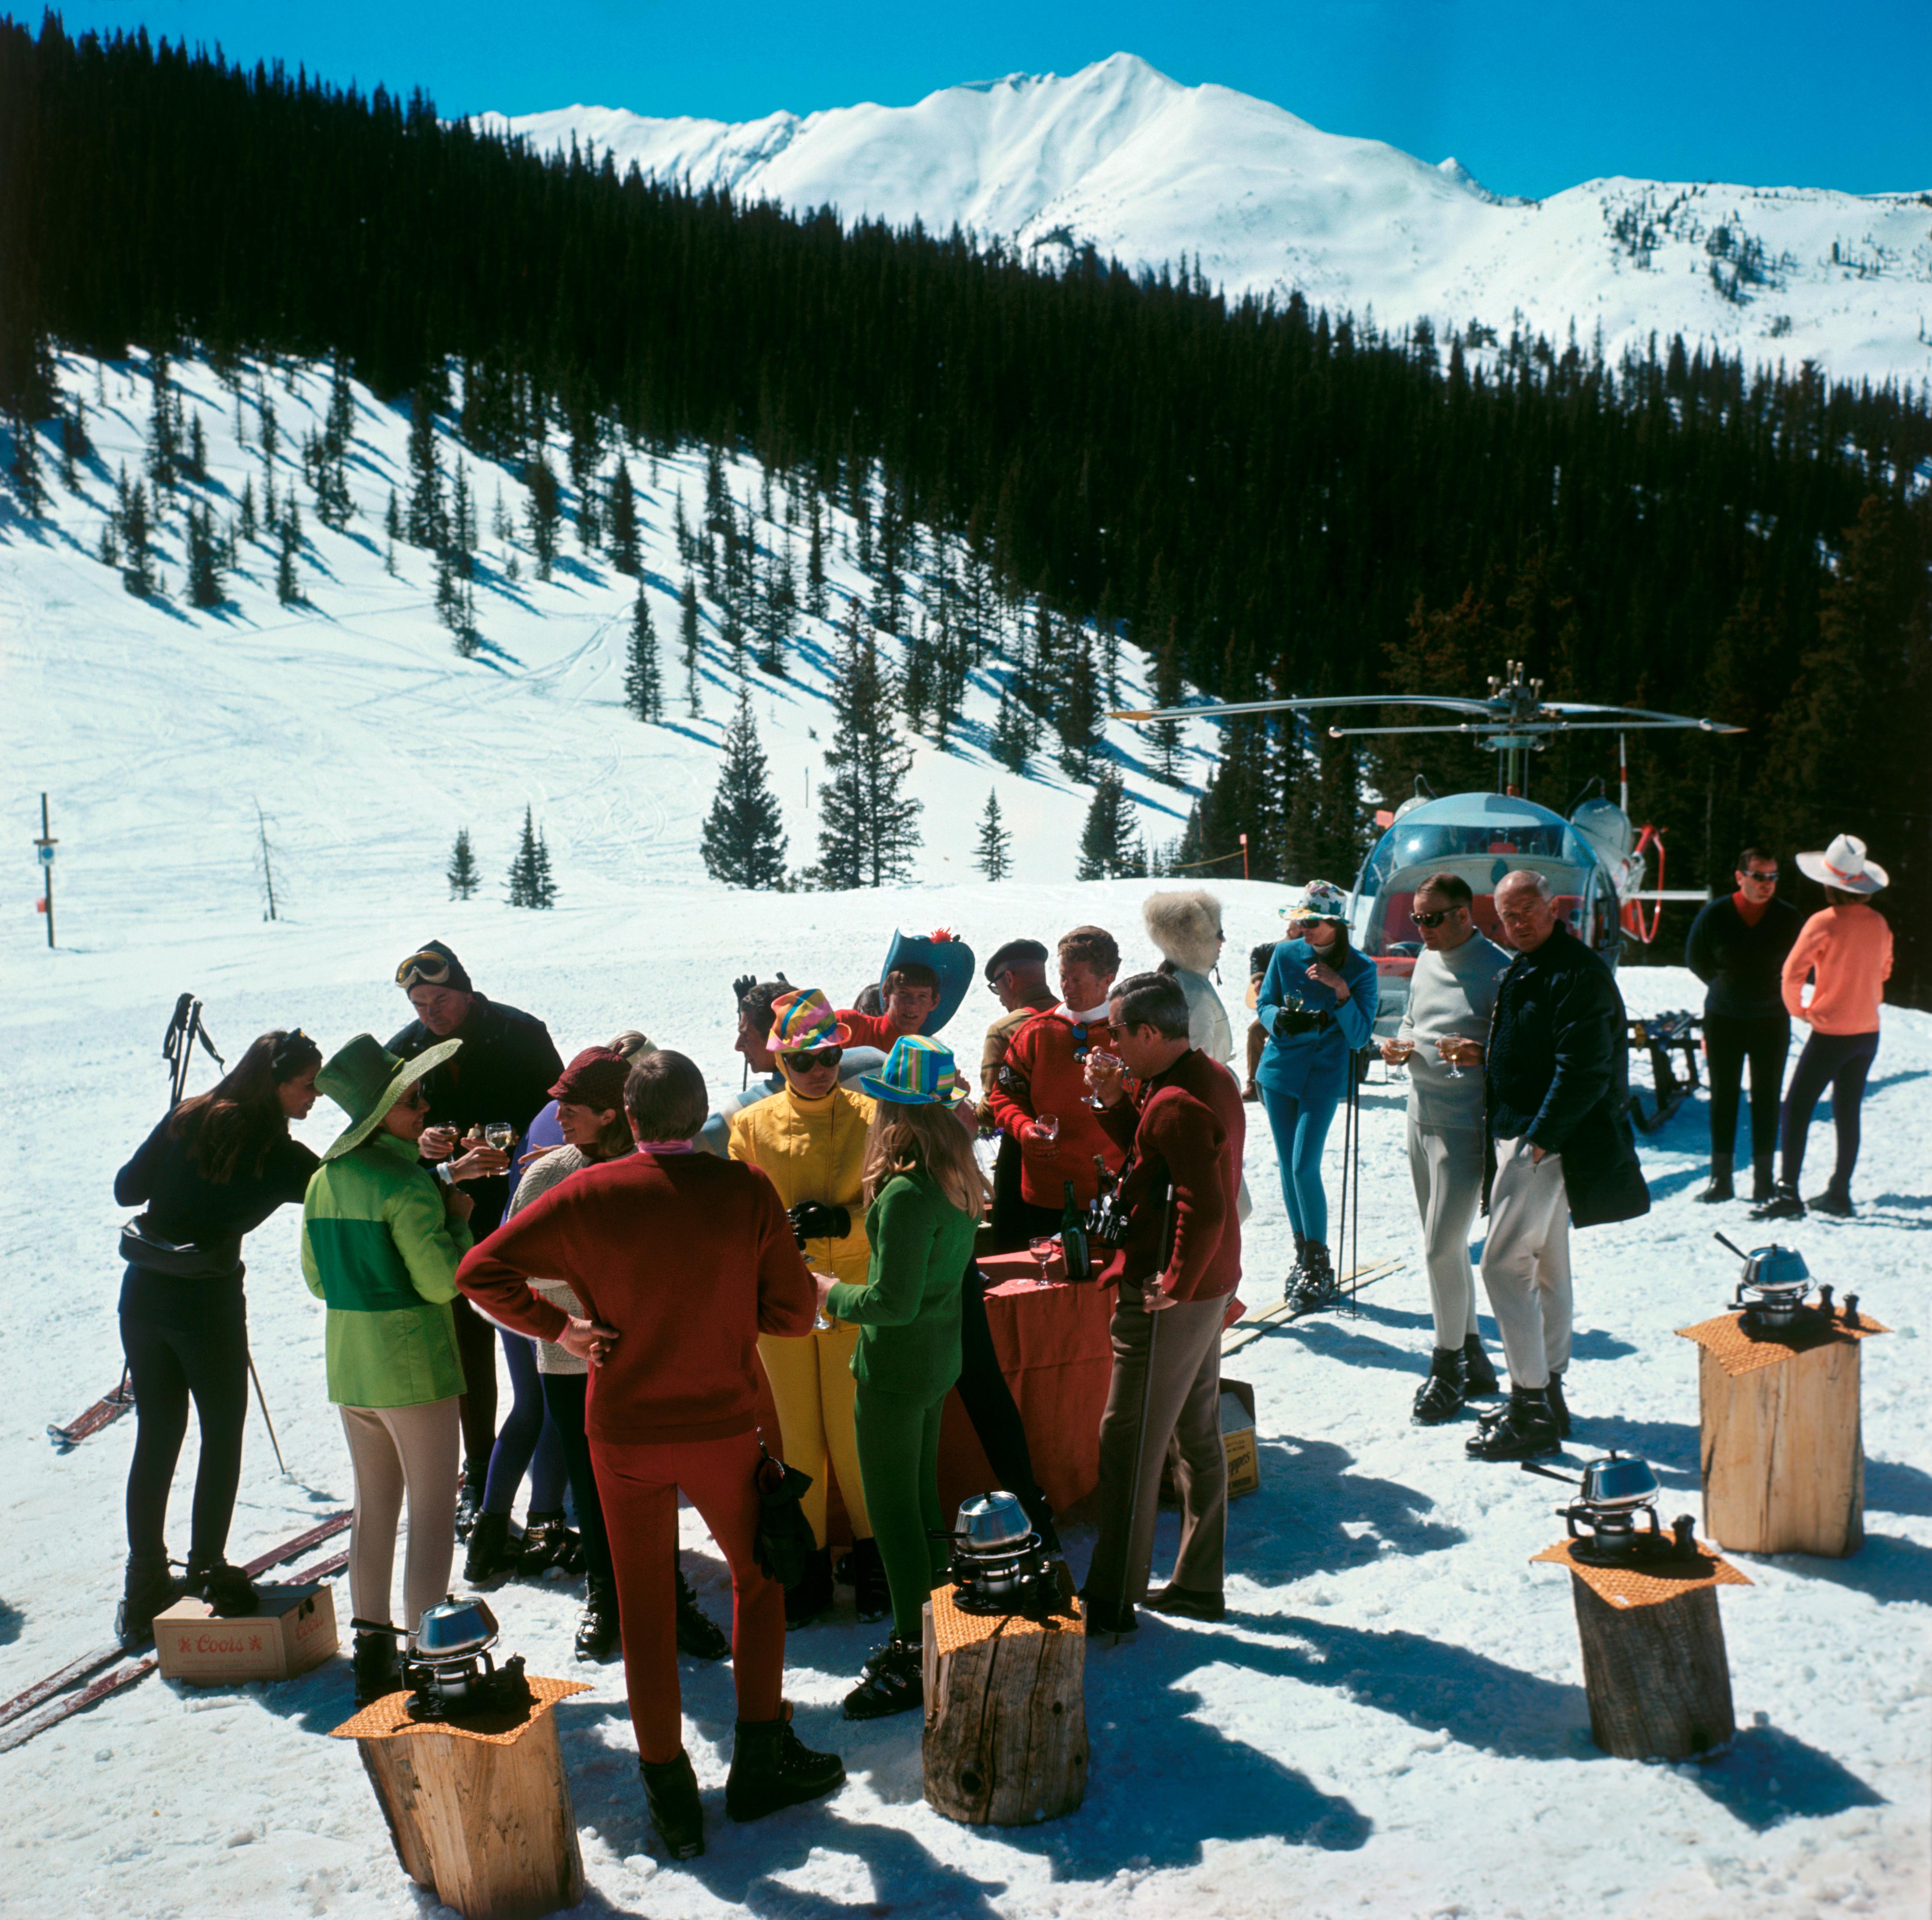 Snowmass Village
1967
Chromogenic Lambda Print
Estate edition of 150

Women in colourful hats at an apres ski party in Snowmass Village, in Pitkin County, Colorado, in March 1968.
1967: A stand-up fondue picnic for skiers at Snowmass-at-Aspen,